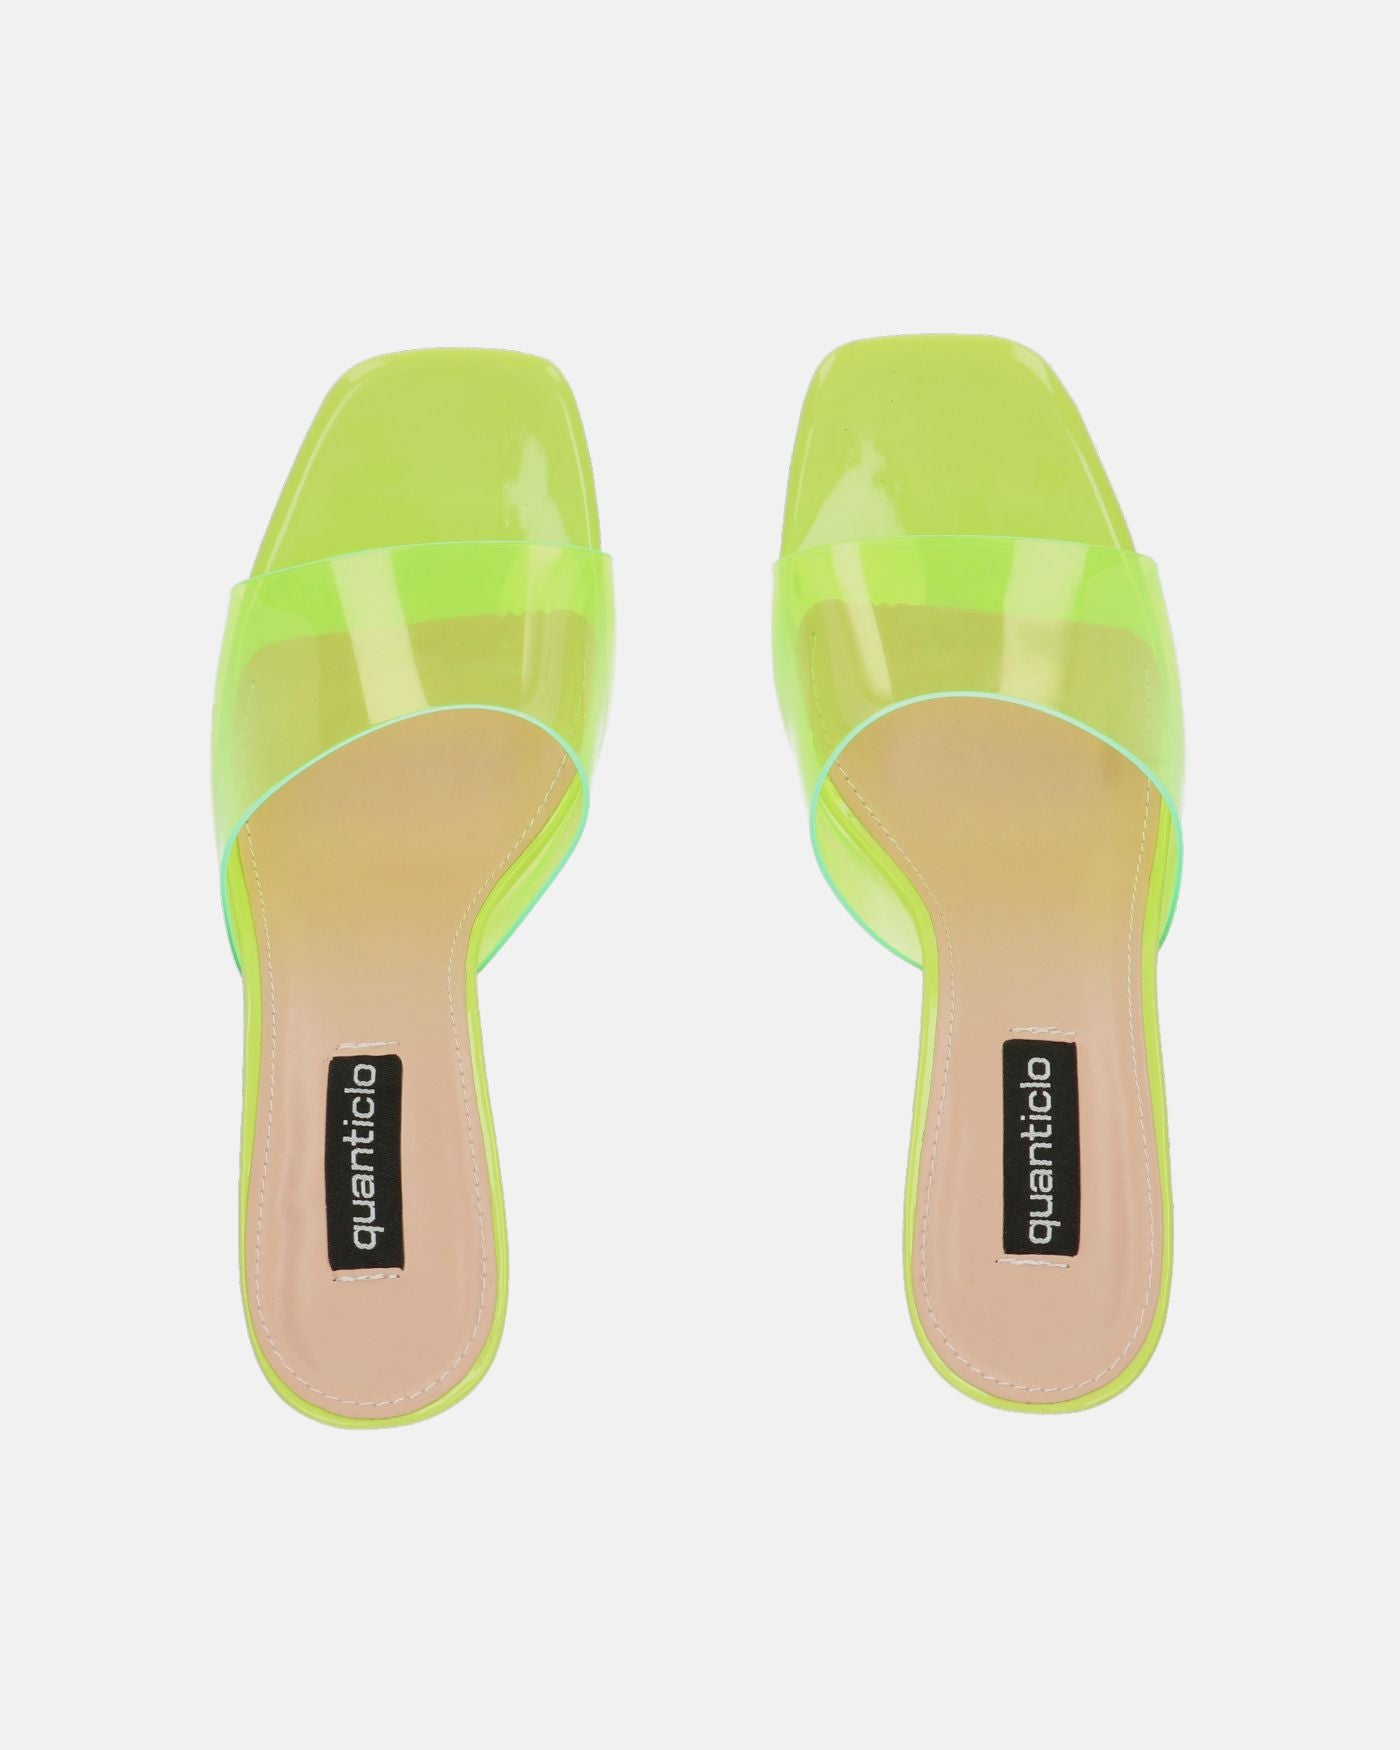 FIAMMA - yellow perspex heeled sandal with PU sole